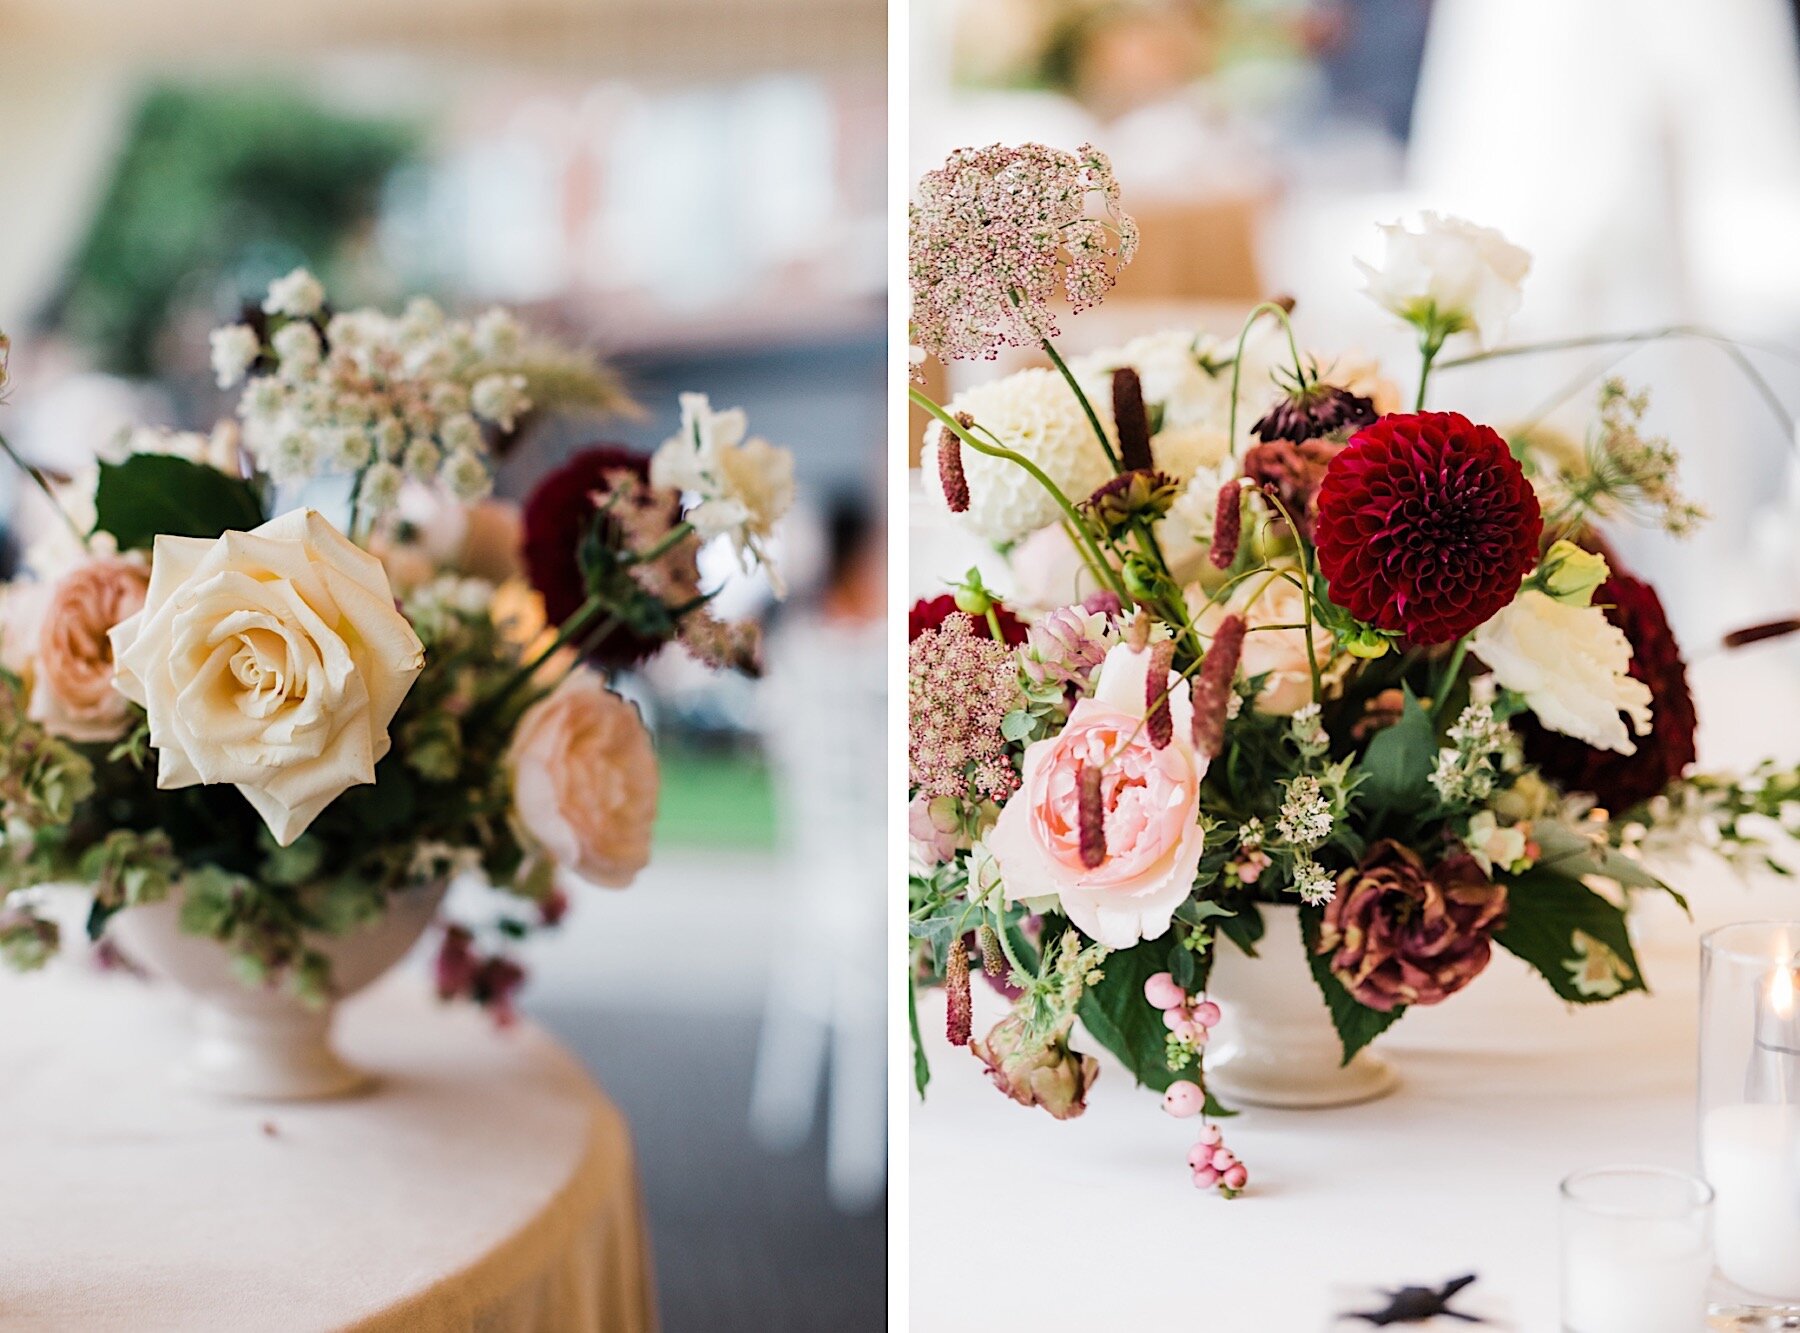 24_shaxton-ngo-431_shaxton-ngo-428_A_Woodmark_floral_Seattle_with_Wedding_design_Hotel_from_Company_at_romantic_Design_the_Florist_wedding_Gather_lush_top.jpg